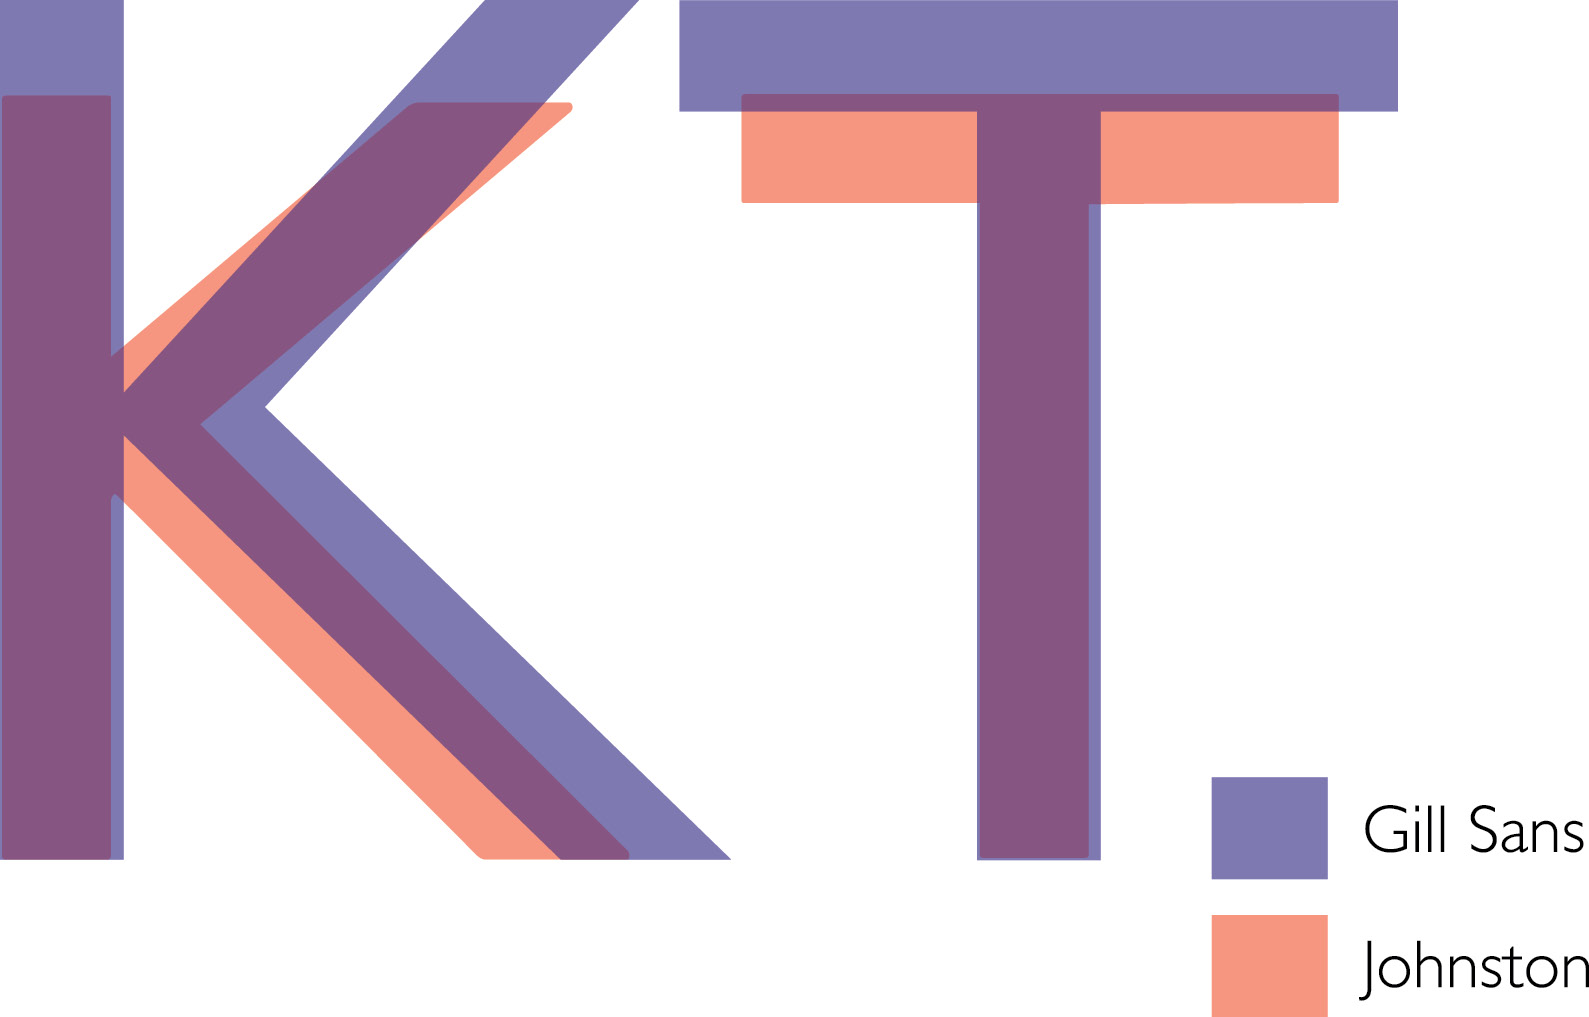 Comparison of uppercase K and T in Gill Sans and Johnston